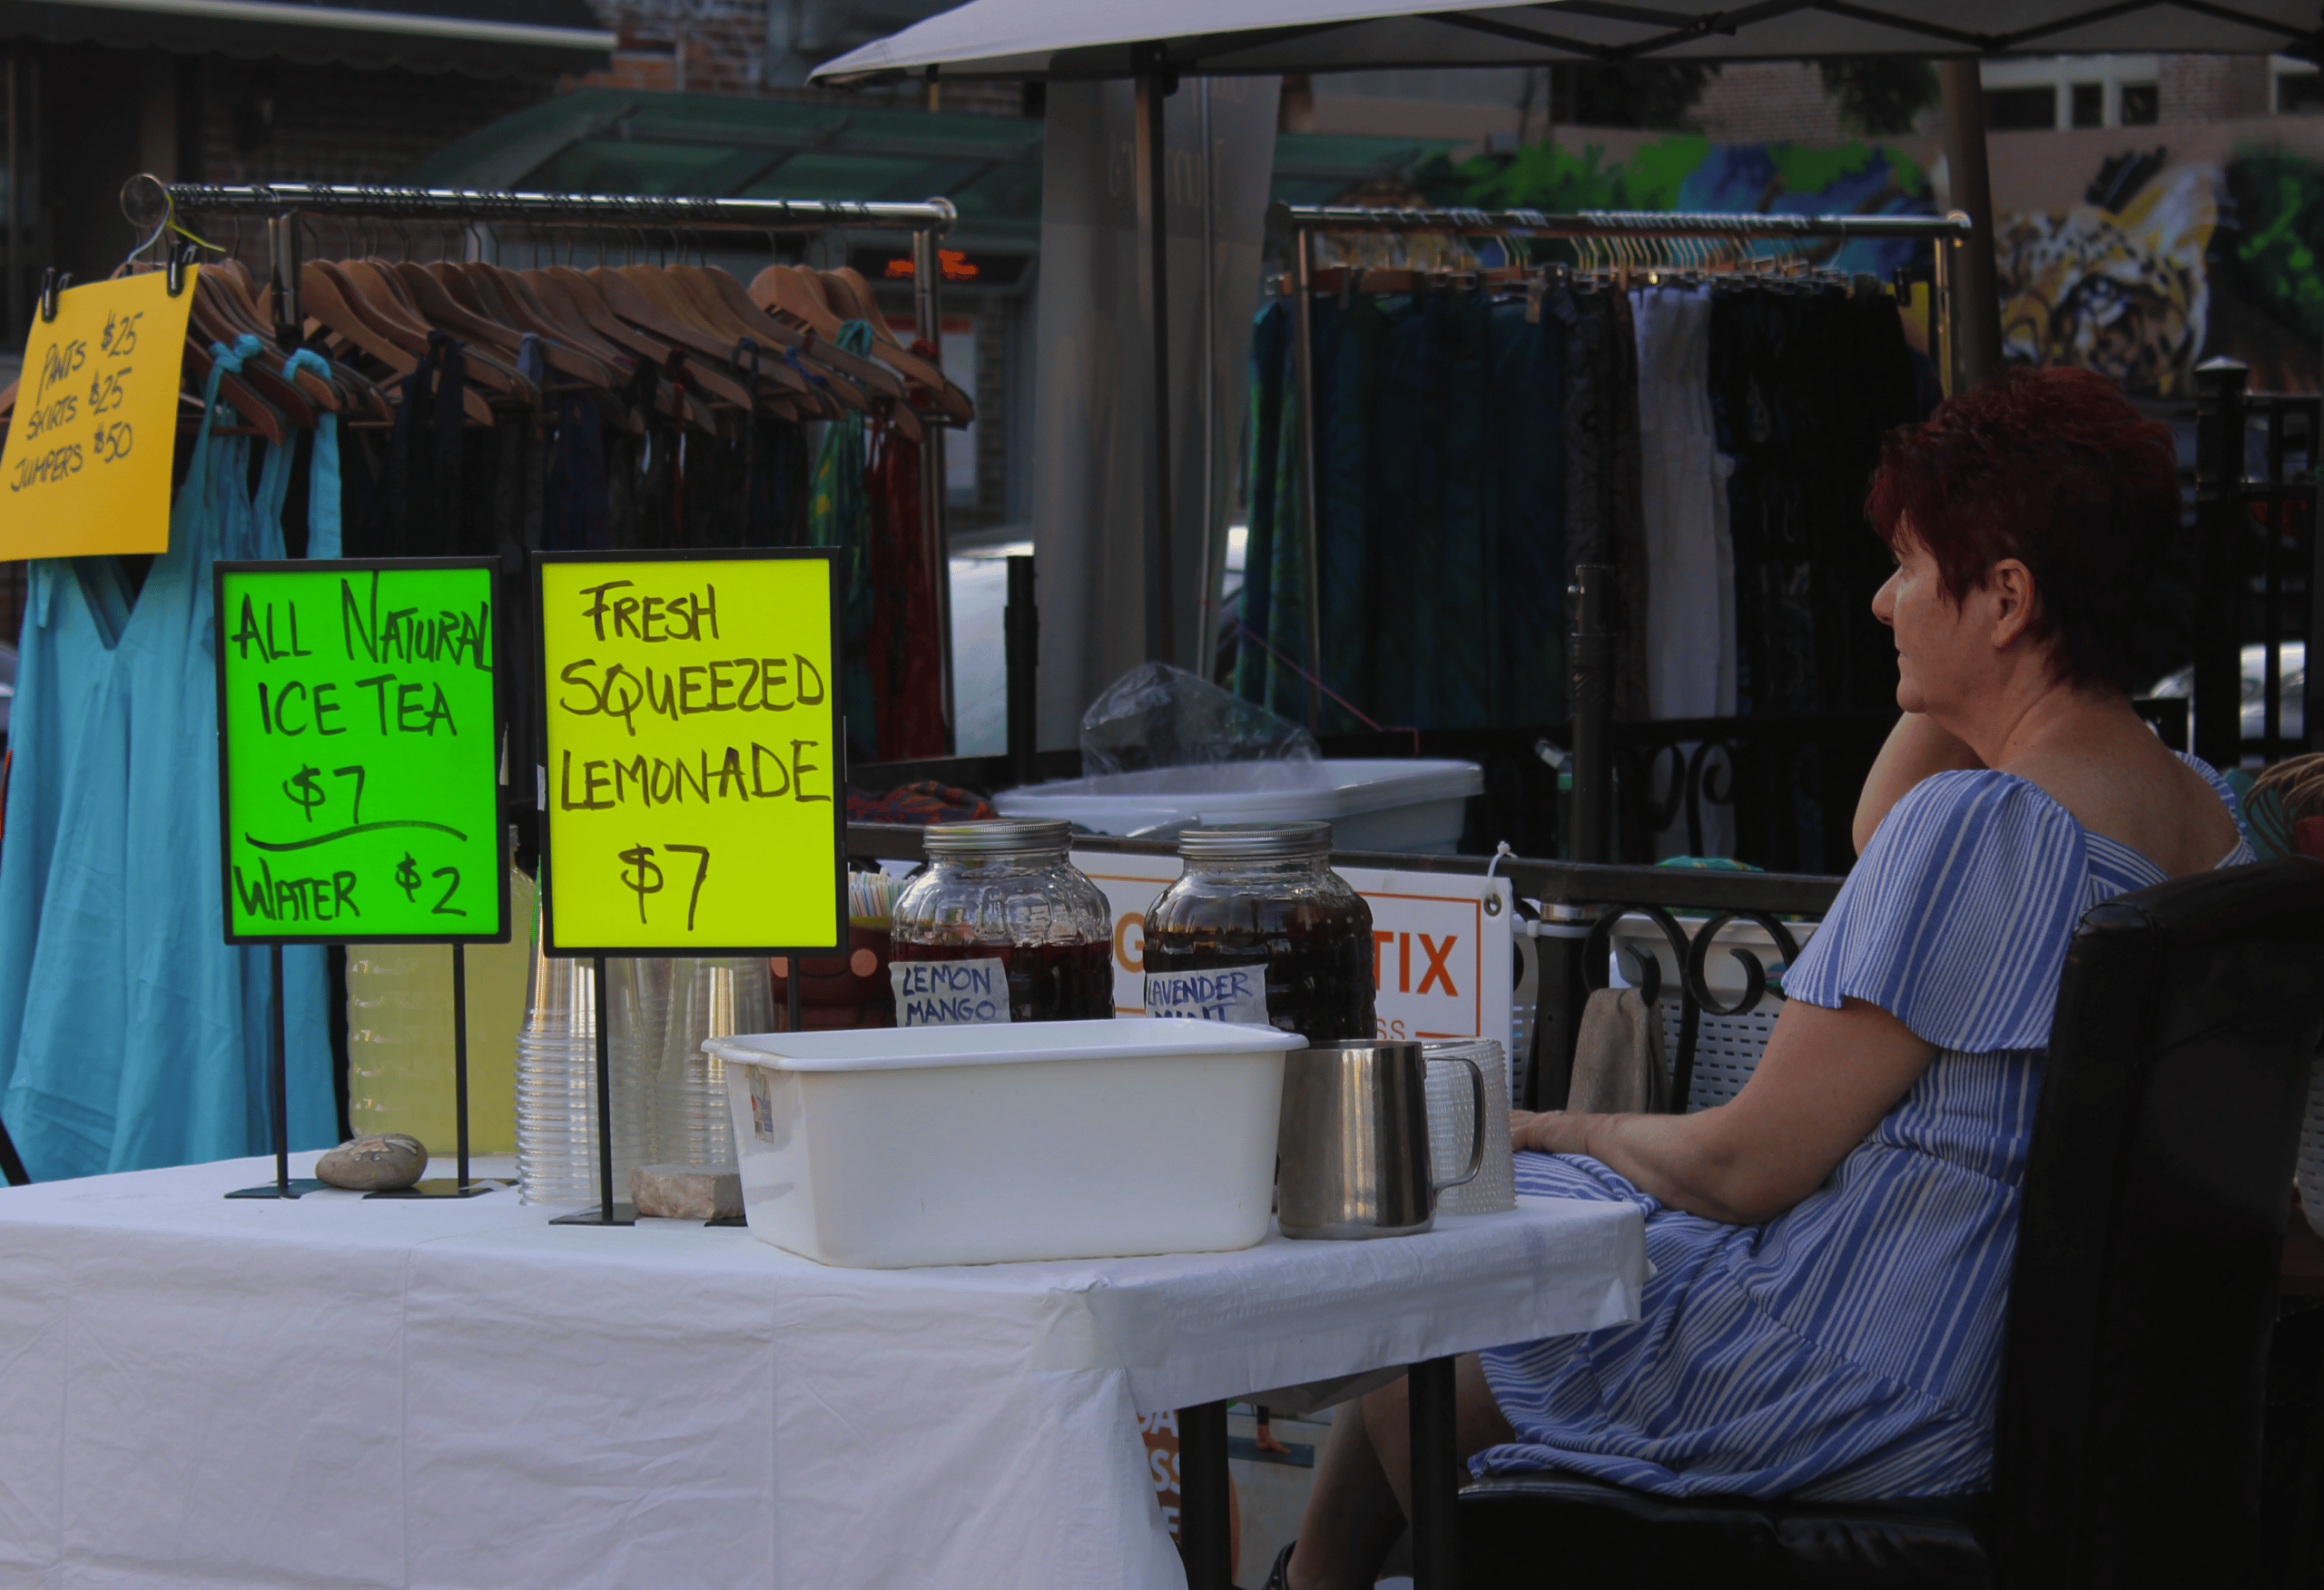 A StreetFest vendor selling drinks